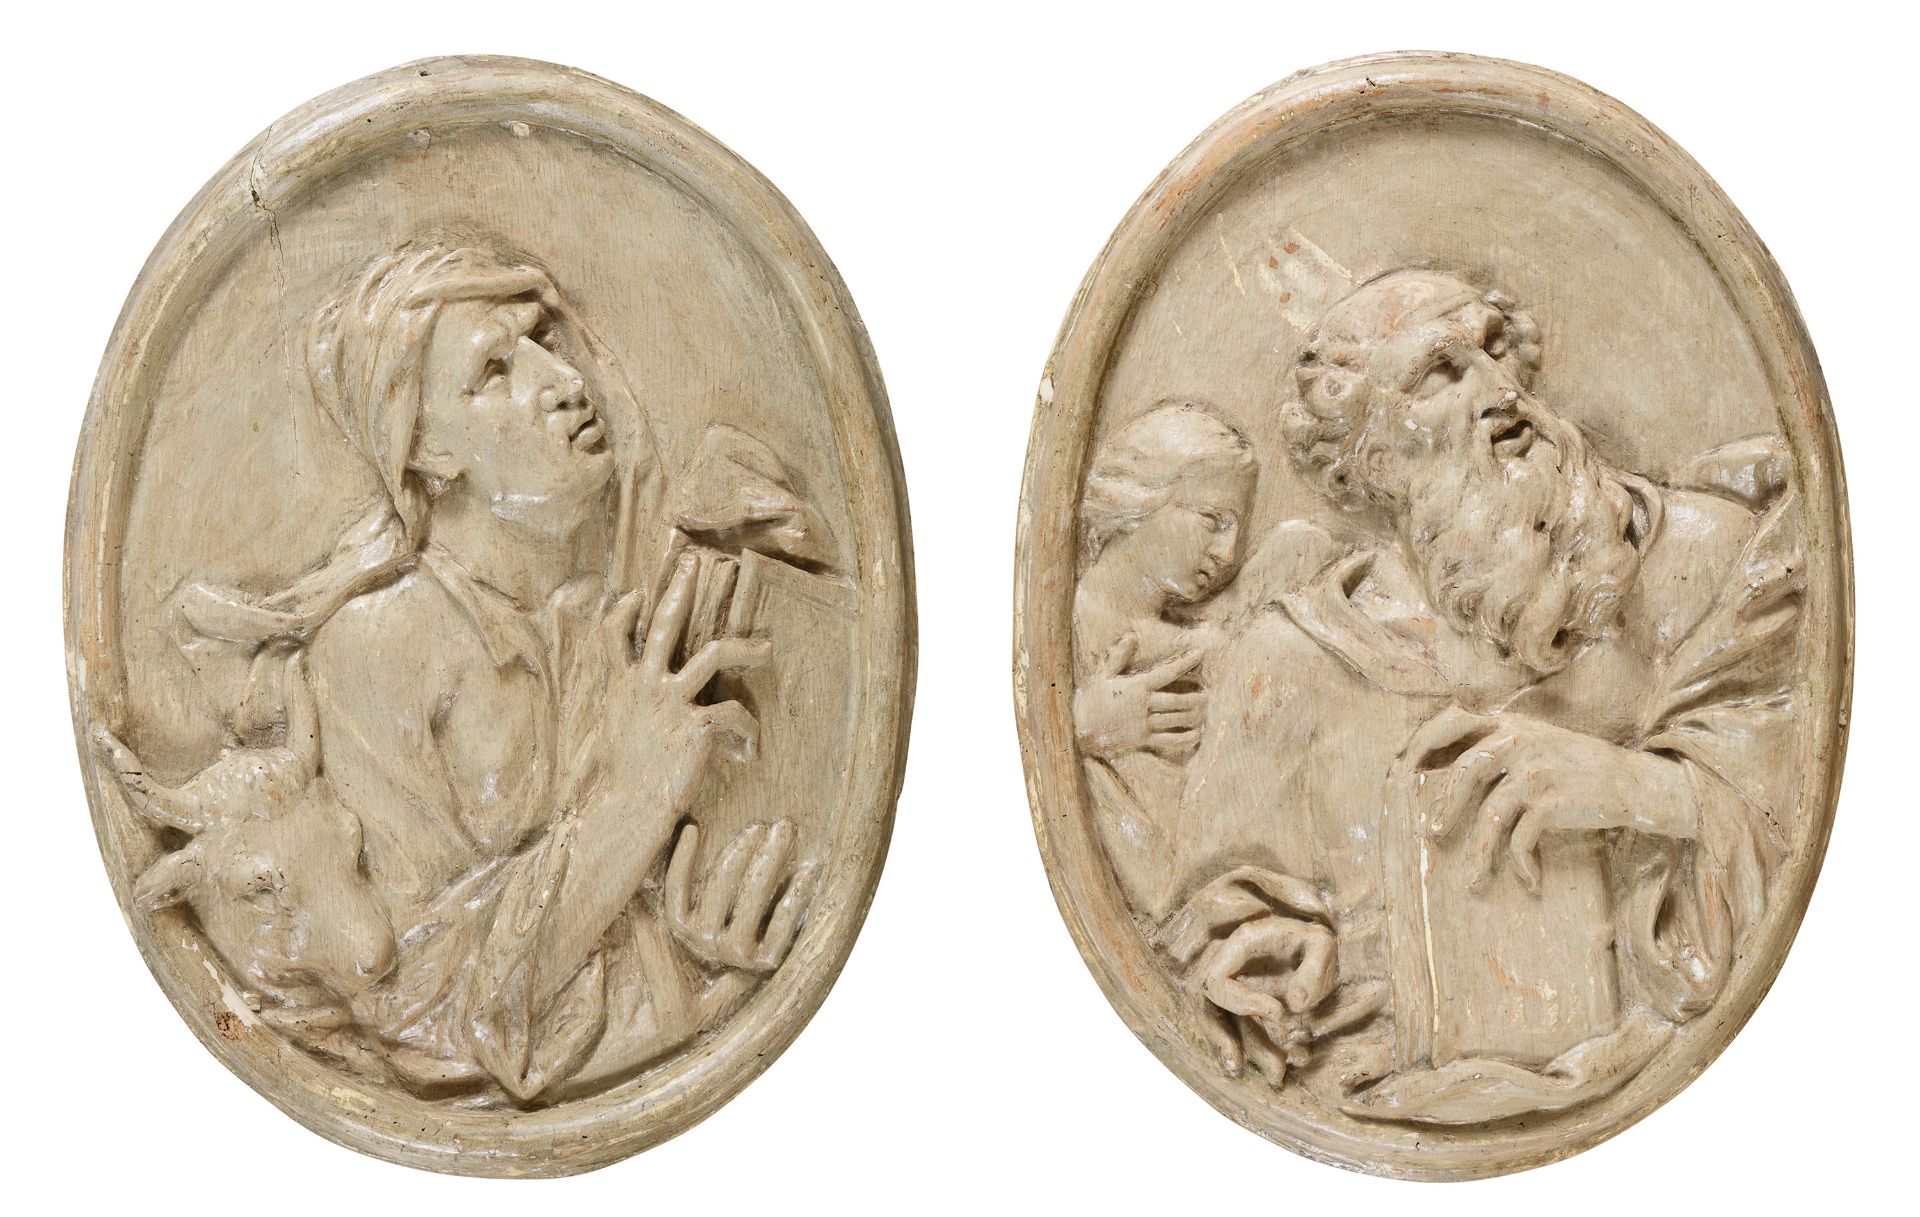 PAIR OF WOODEN OVAL BAS-RELIEFS NORTHERN ITALY 17TH CENTURY